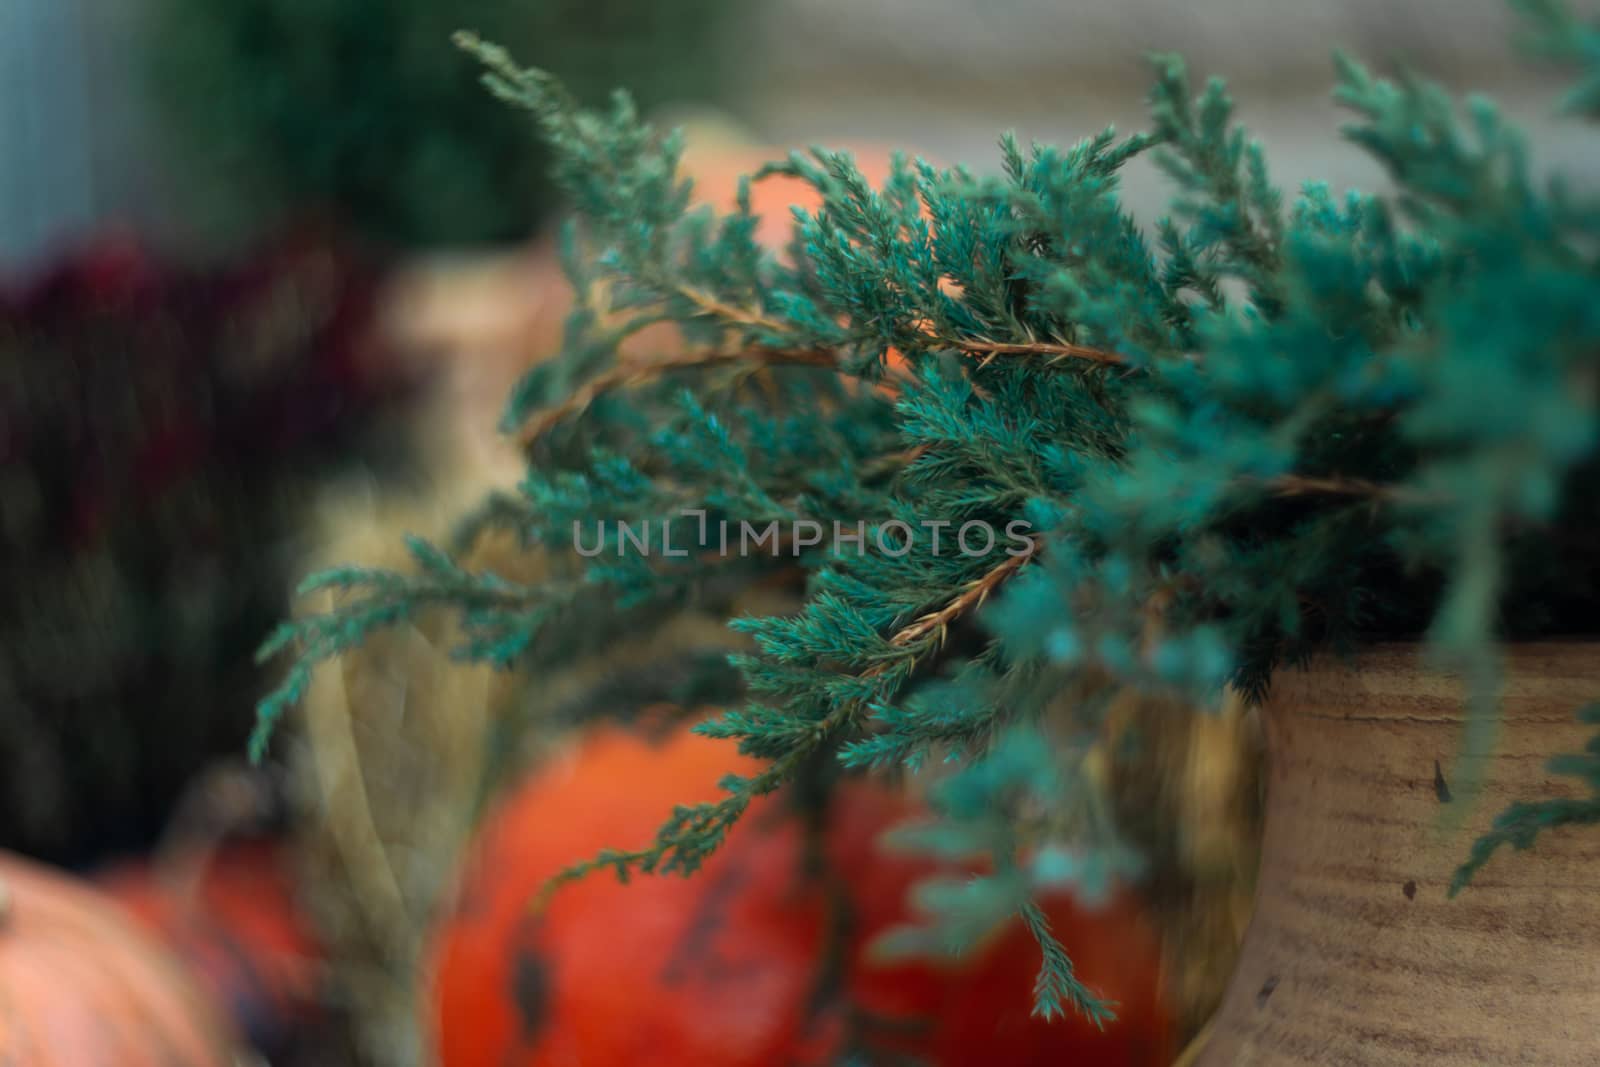 Pumpkin and straw near green thuja in front of stone wall. Halloween decoration.